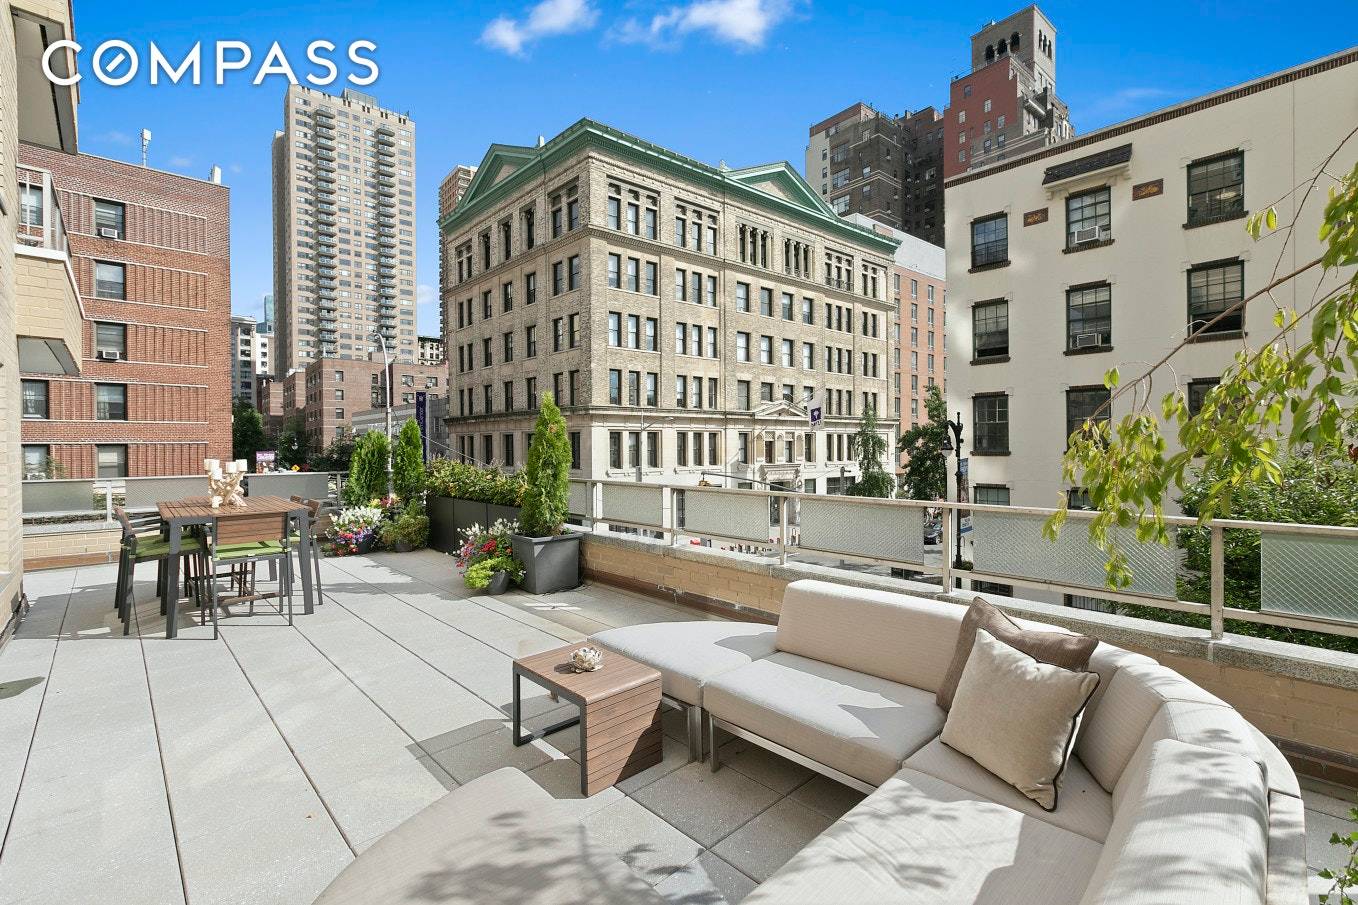 CONTRACT OUT Greenwich Village 2 Bedroom 1 Bathroom plans in place for a second 1 2 bathroom sun drenched South East facing home with tons of windows and a huge ...